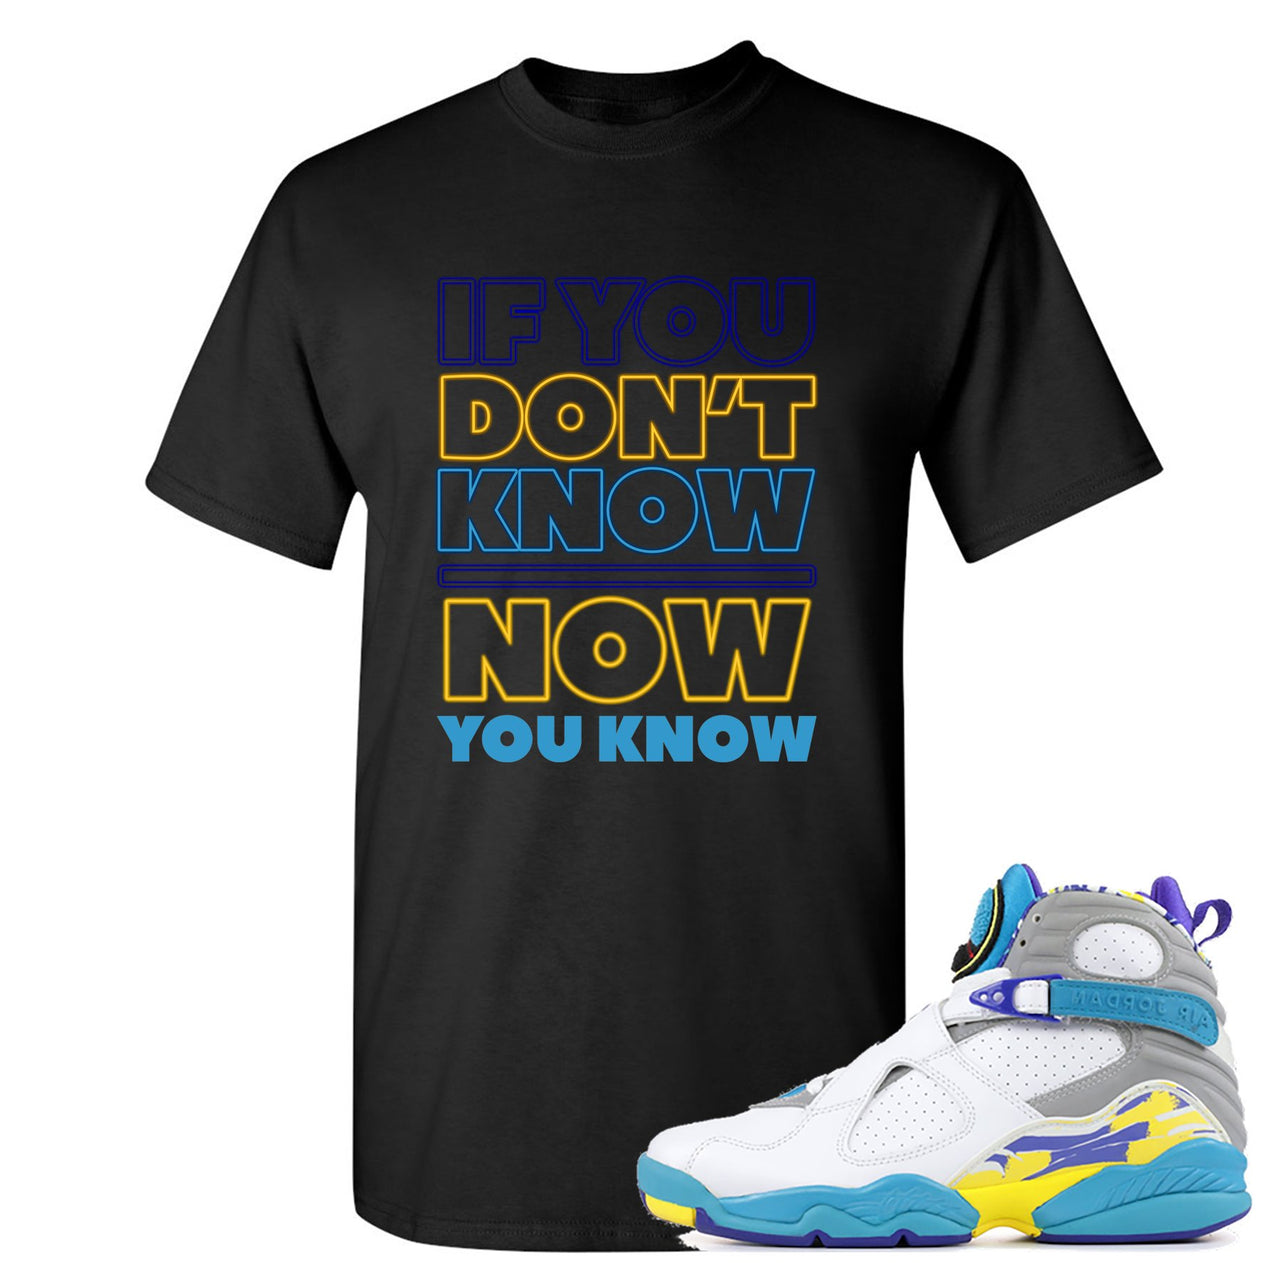 White Aqua 8s T Shirt | If You Don't Know Now You Know, Black